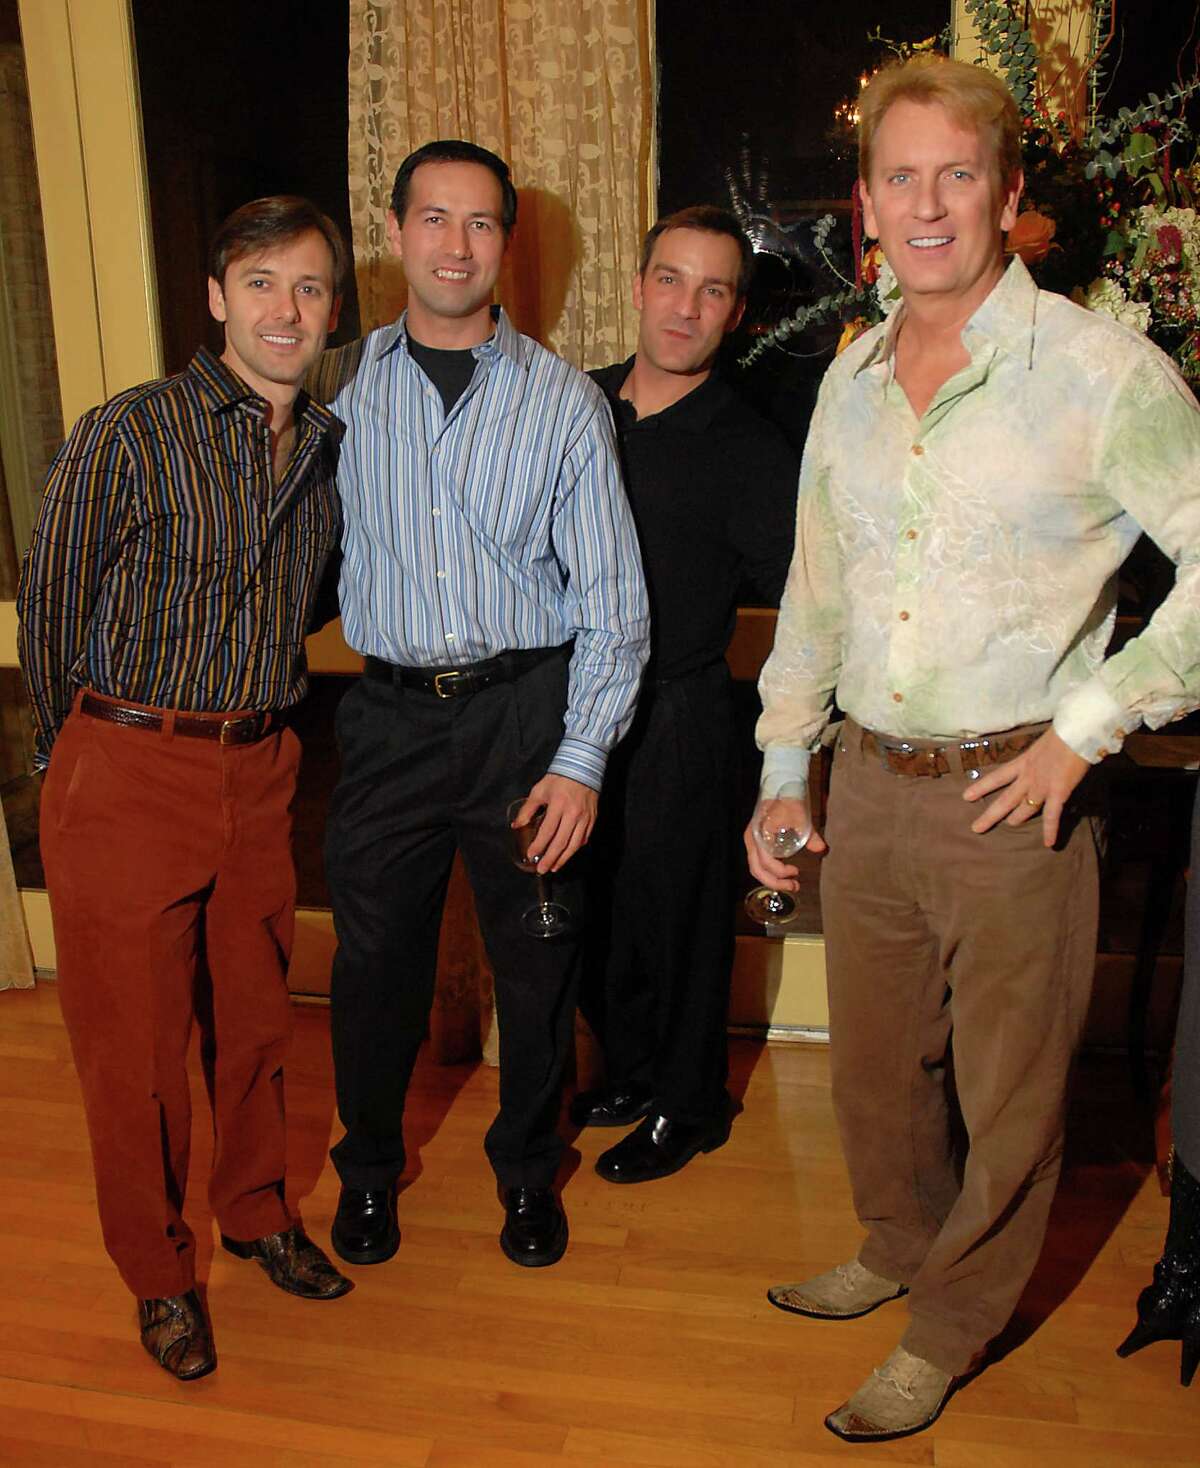 Kevin Gilliard, left, and Frank Billingsley, right, were married Dec. 12, 2012, in New York City. Here they are pictured with Richard Layman and Kenneth Lester at an event in 2007.